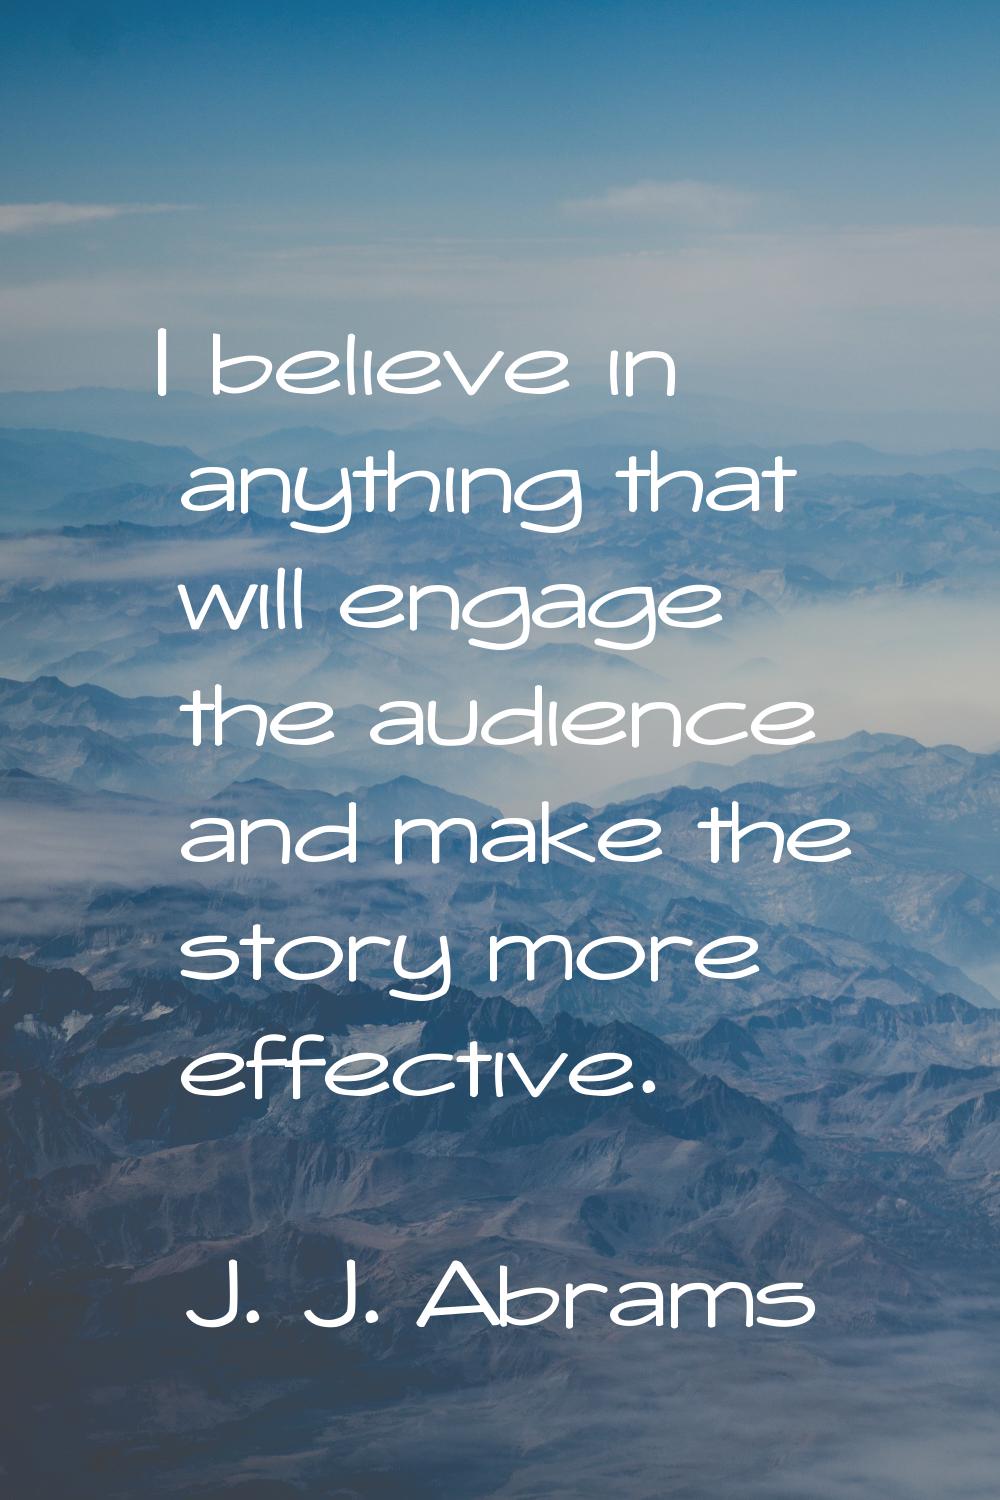 I believe in anything that will engage the audience and make the story more effective.